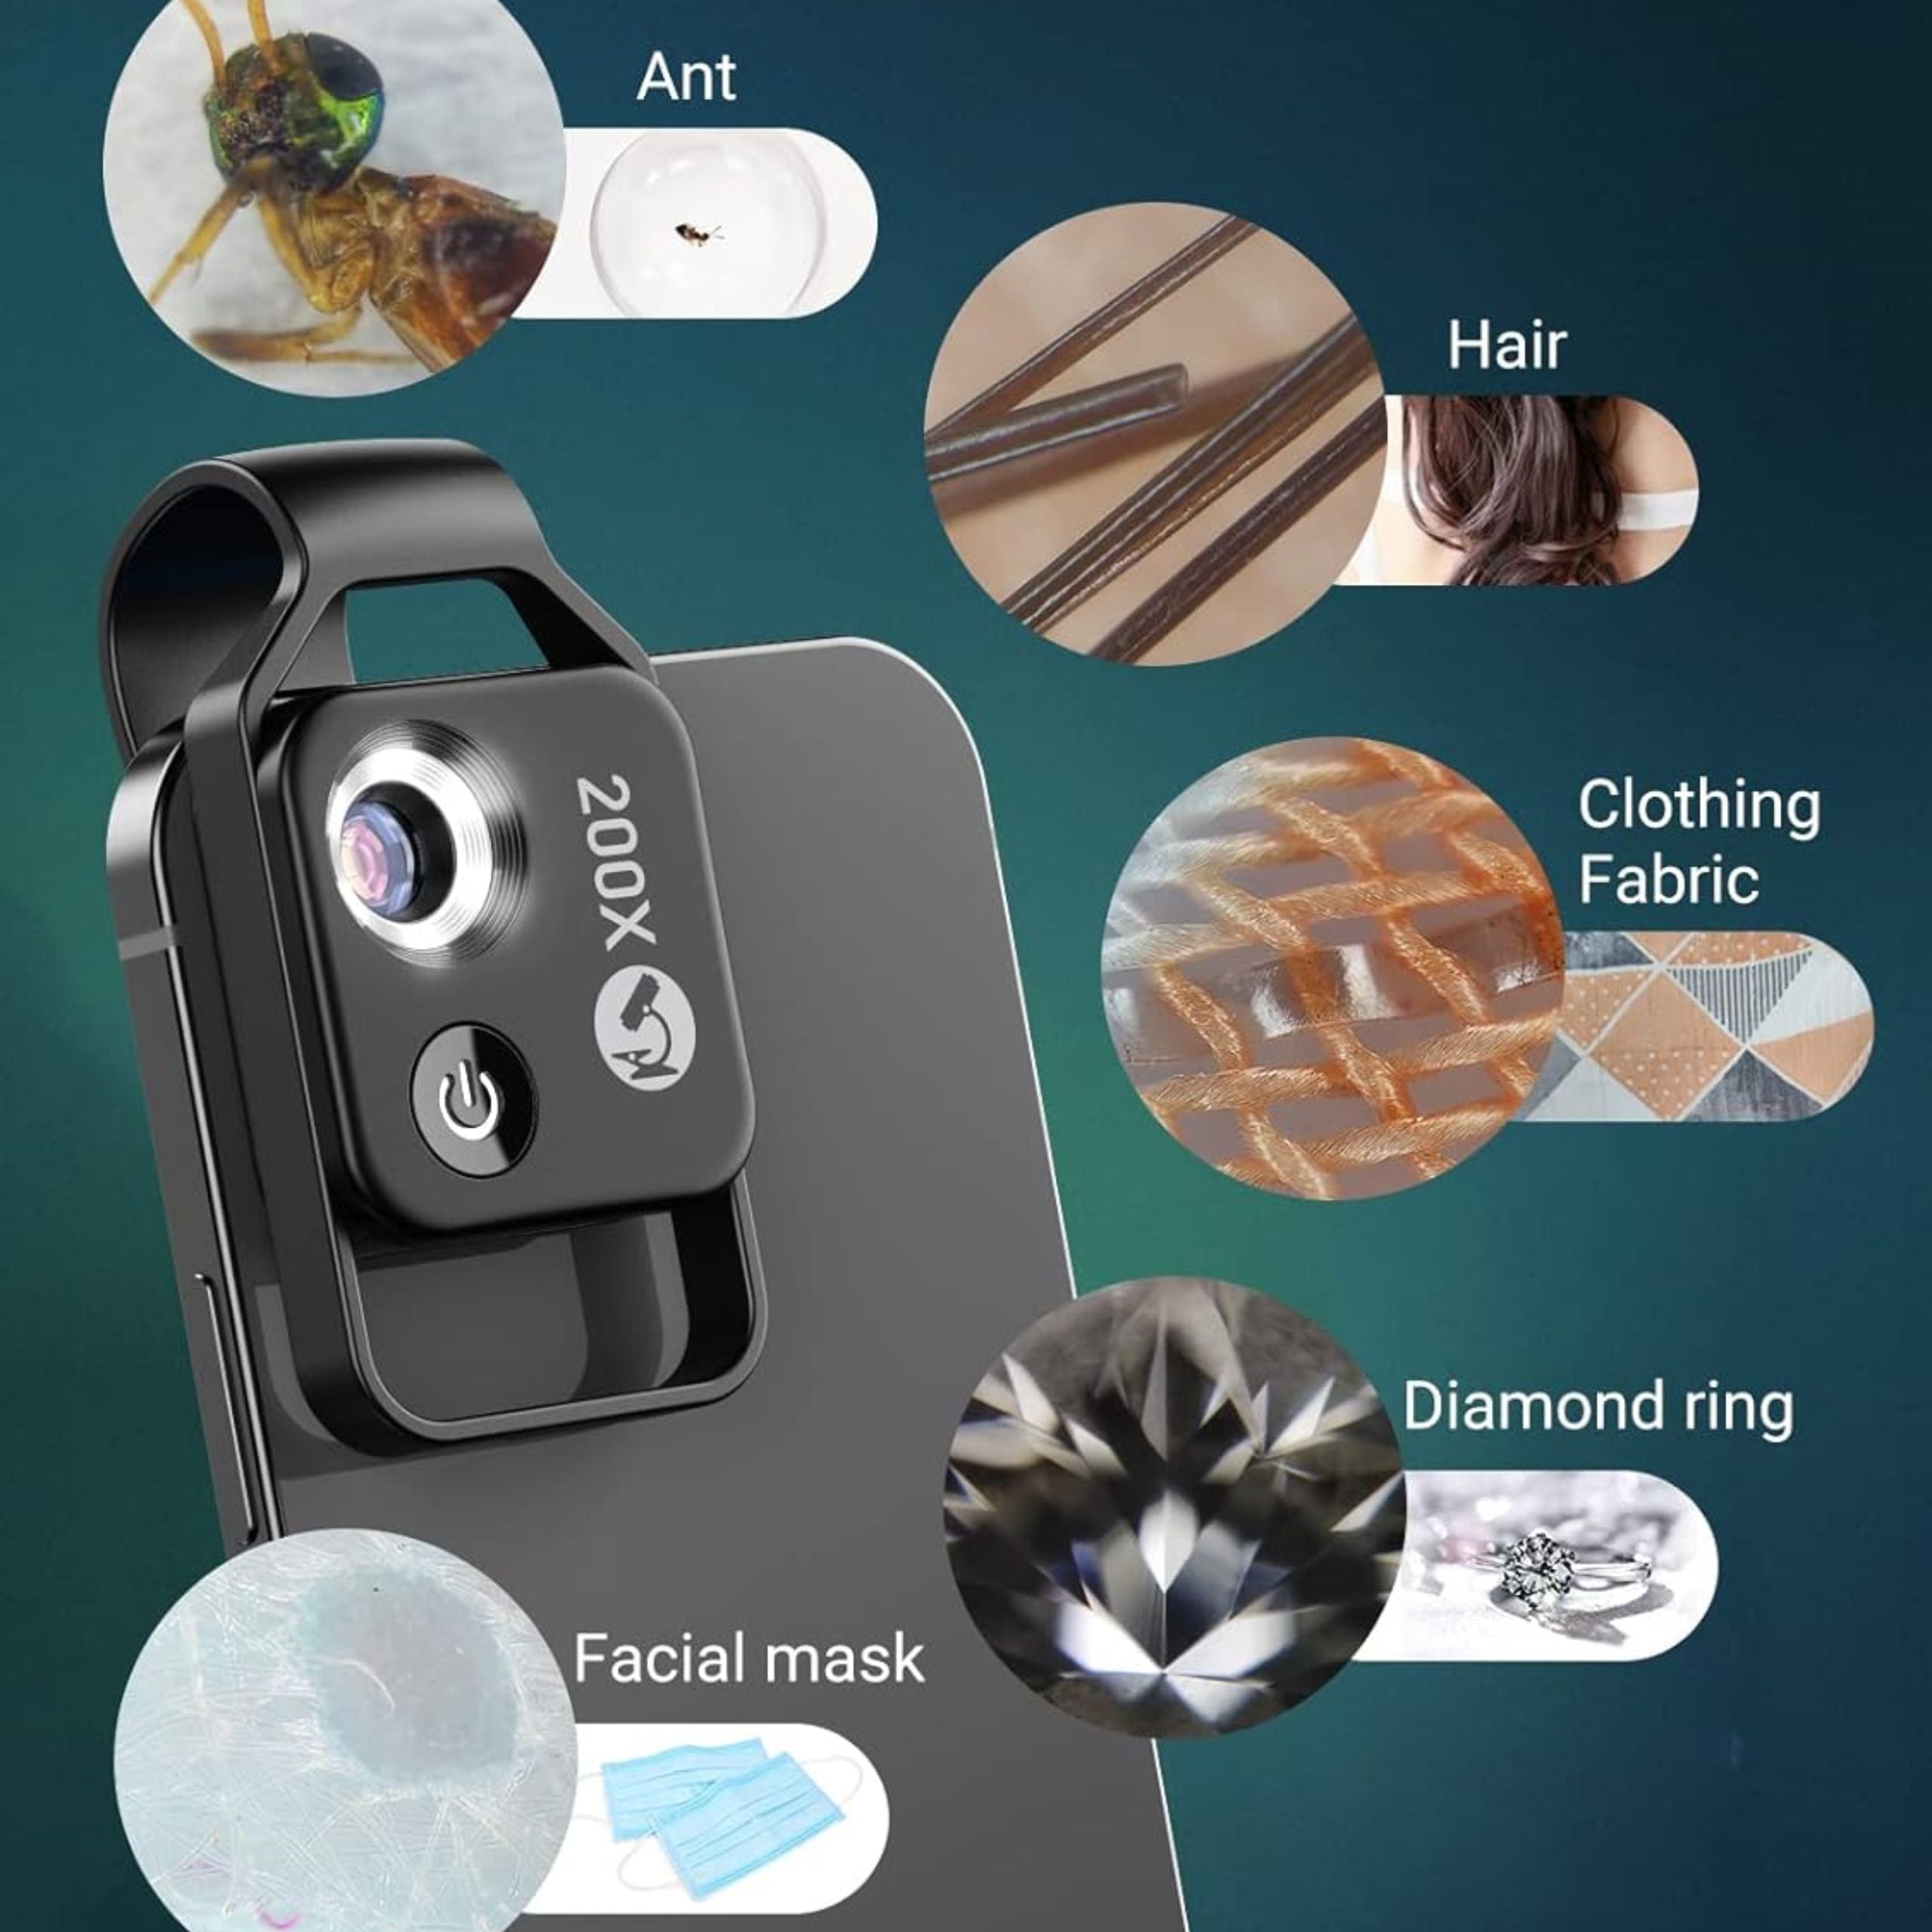 APEXEL 200X Smartphone Microscope Lens With CPL - Black